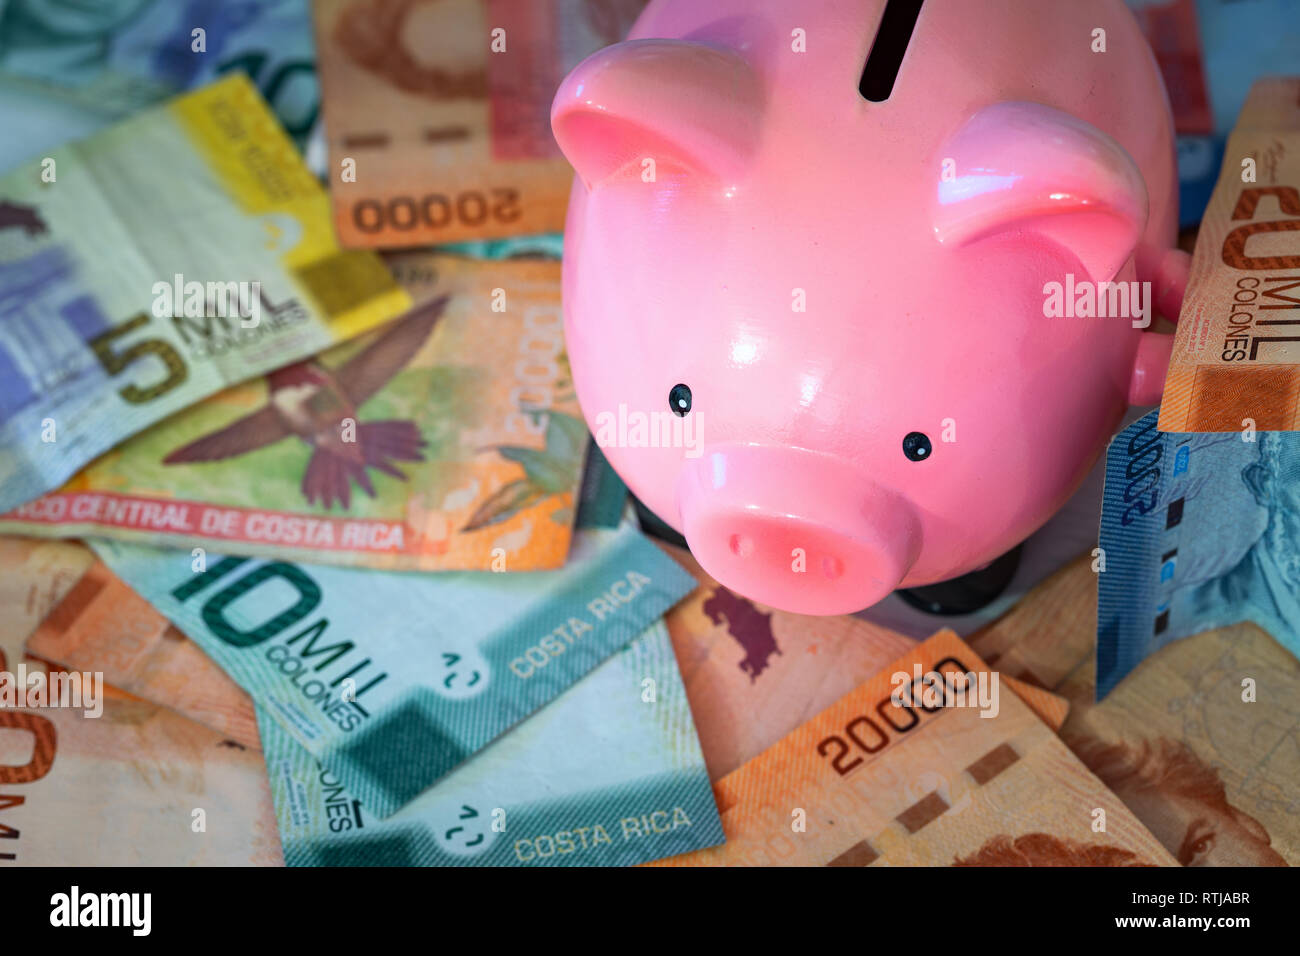 Money from Costa rica / Colones and piggy bank / saving concept Stock Photo